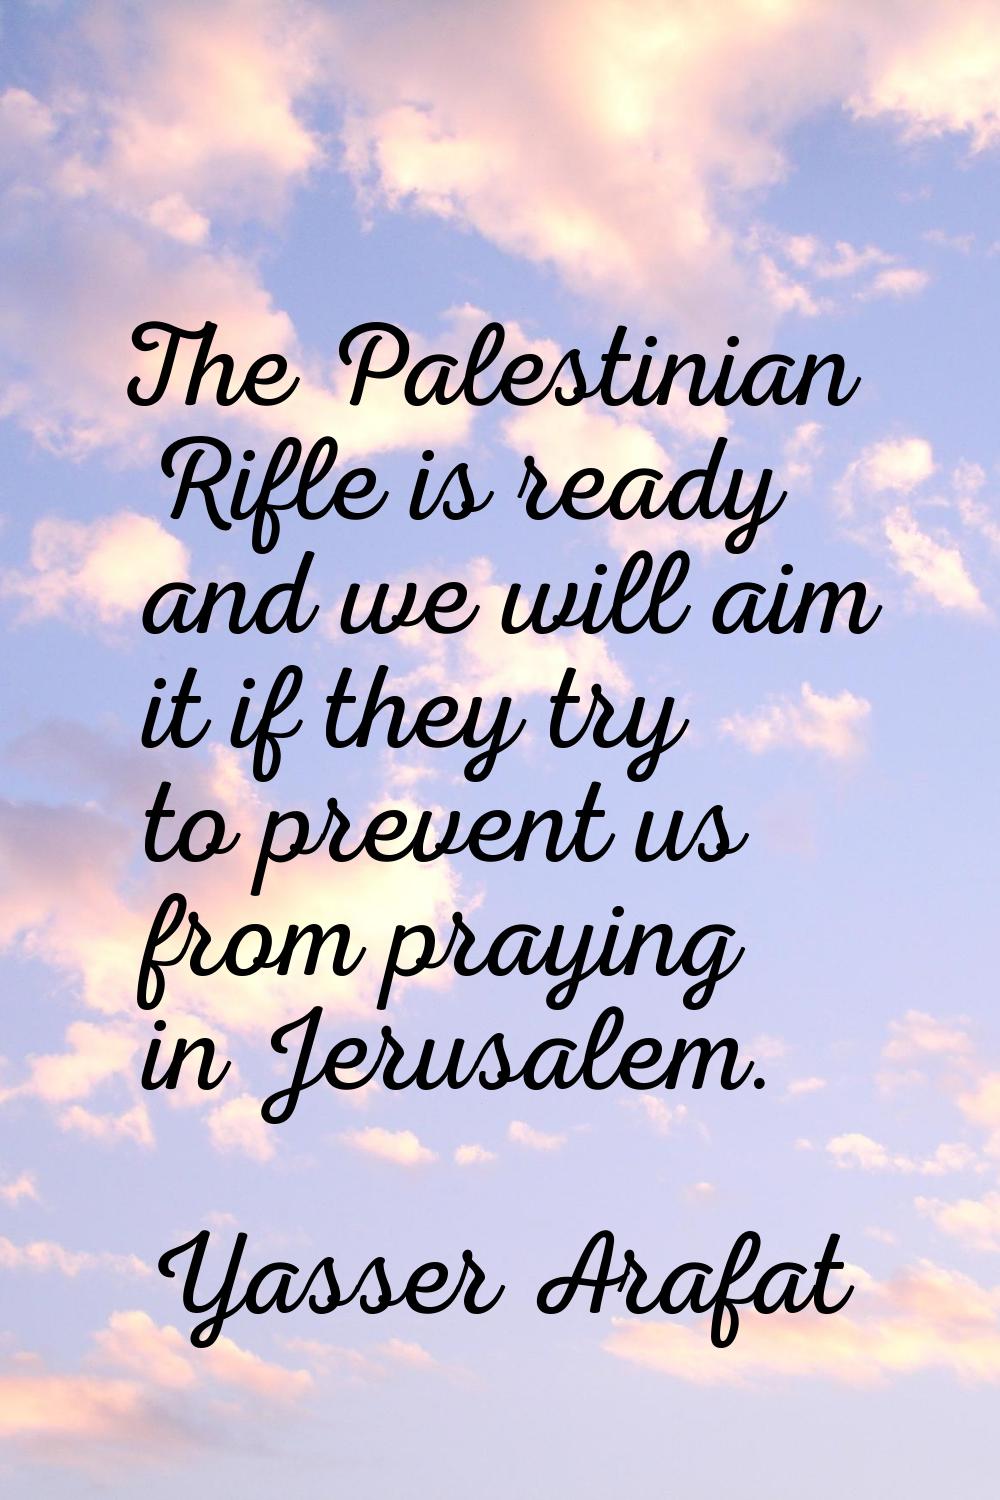 The Palestinian Rifle is ready and we will aim it if they try to prevent us from praying in Jerusal